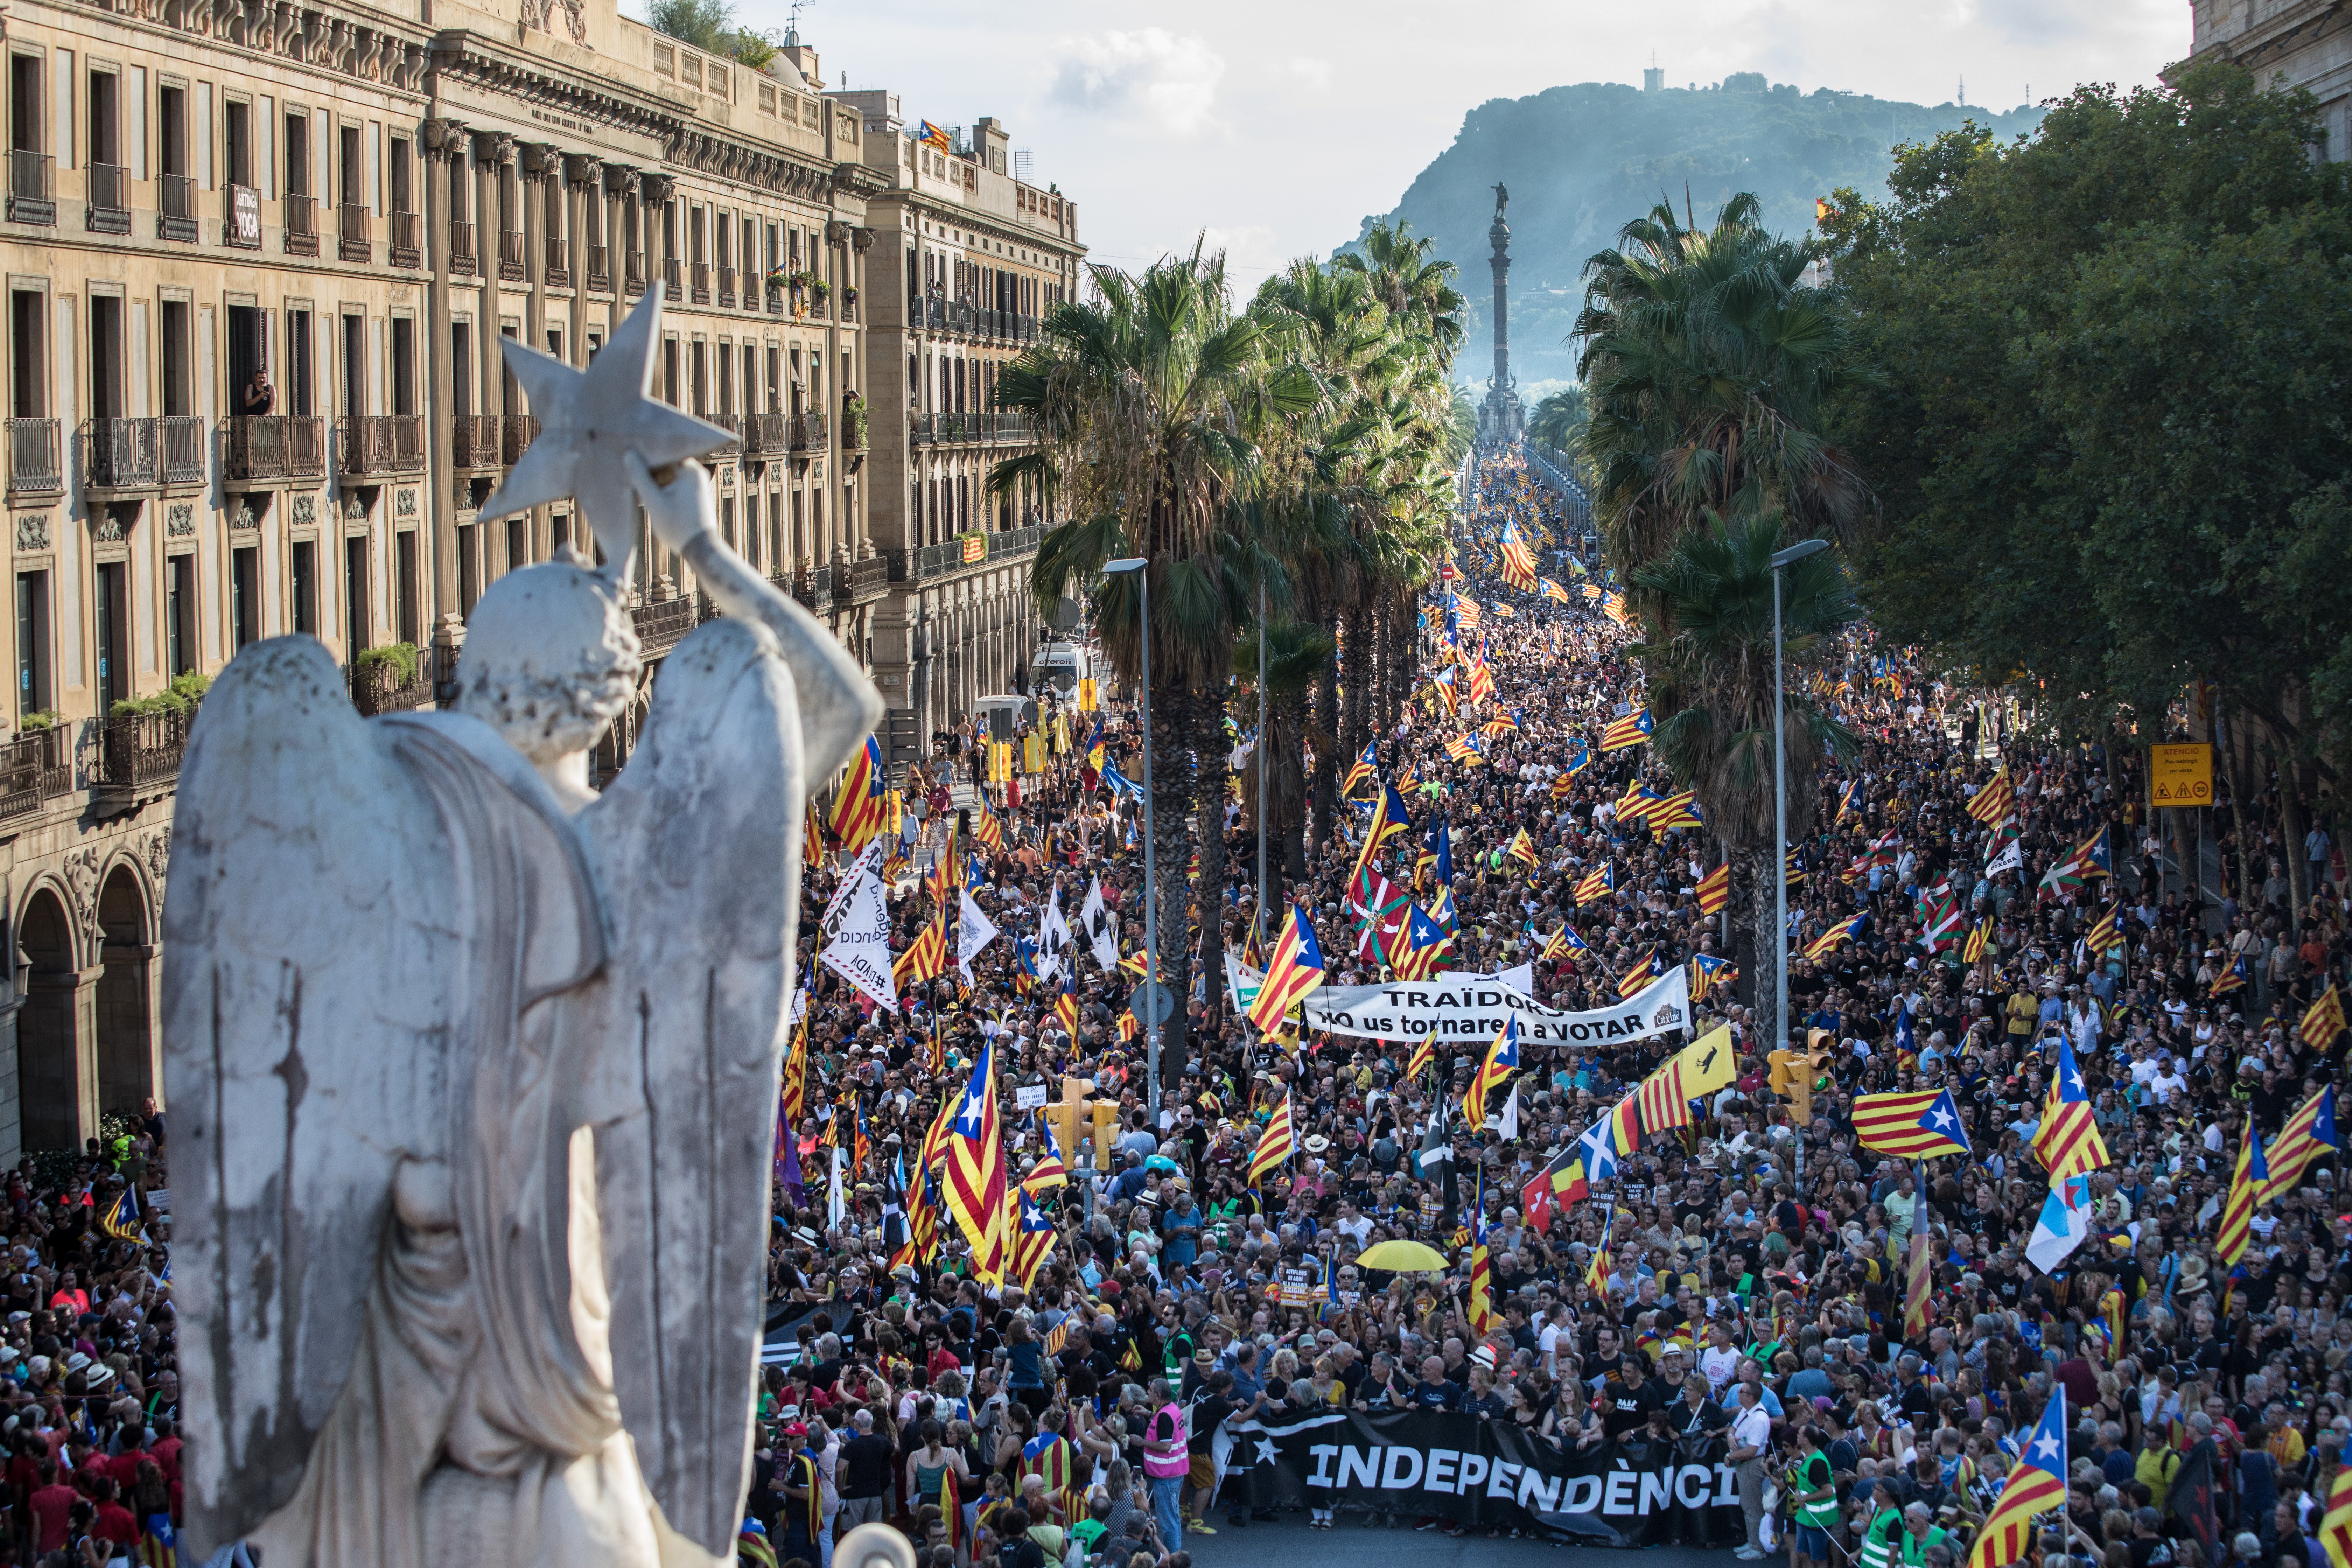 Spain slips the Catalan independence movement into a Europol terrorist list